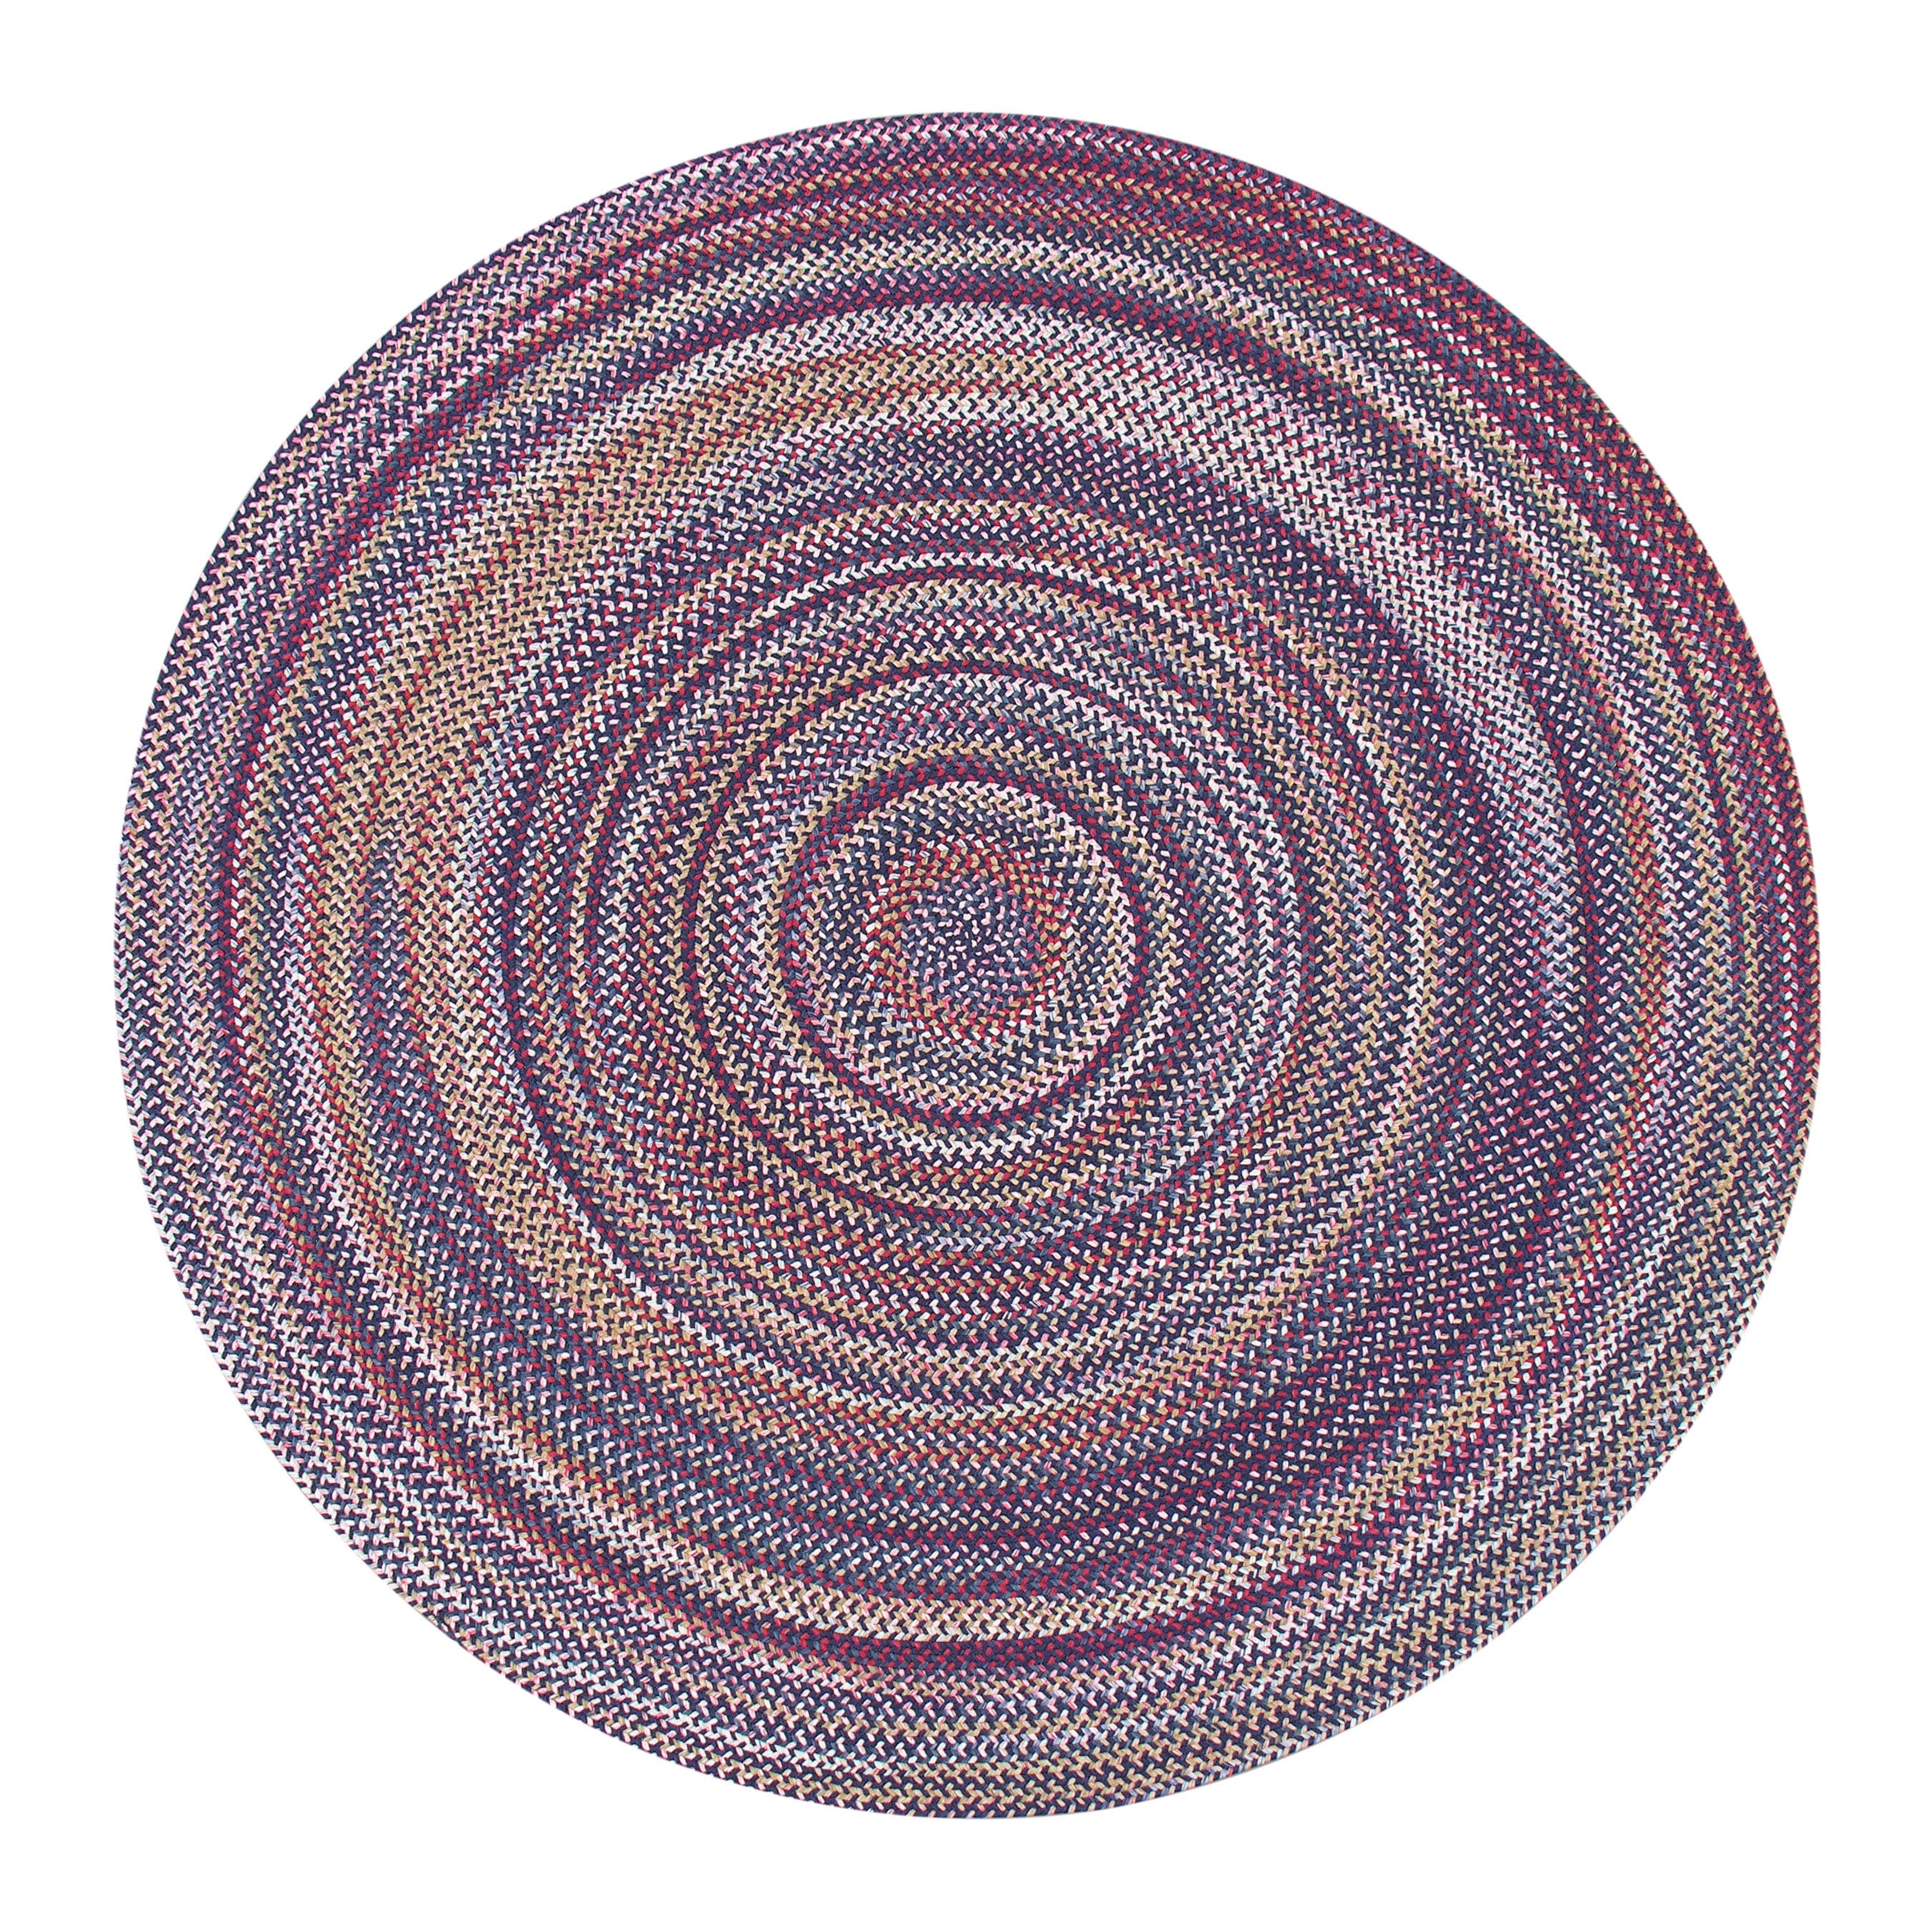 Watch Hill Multi color Indoor/ Outdoor Braided Rug (8 Round)